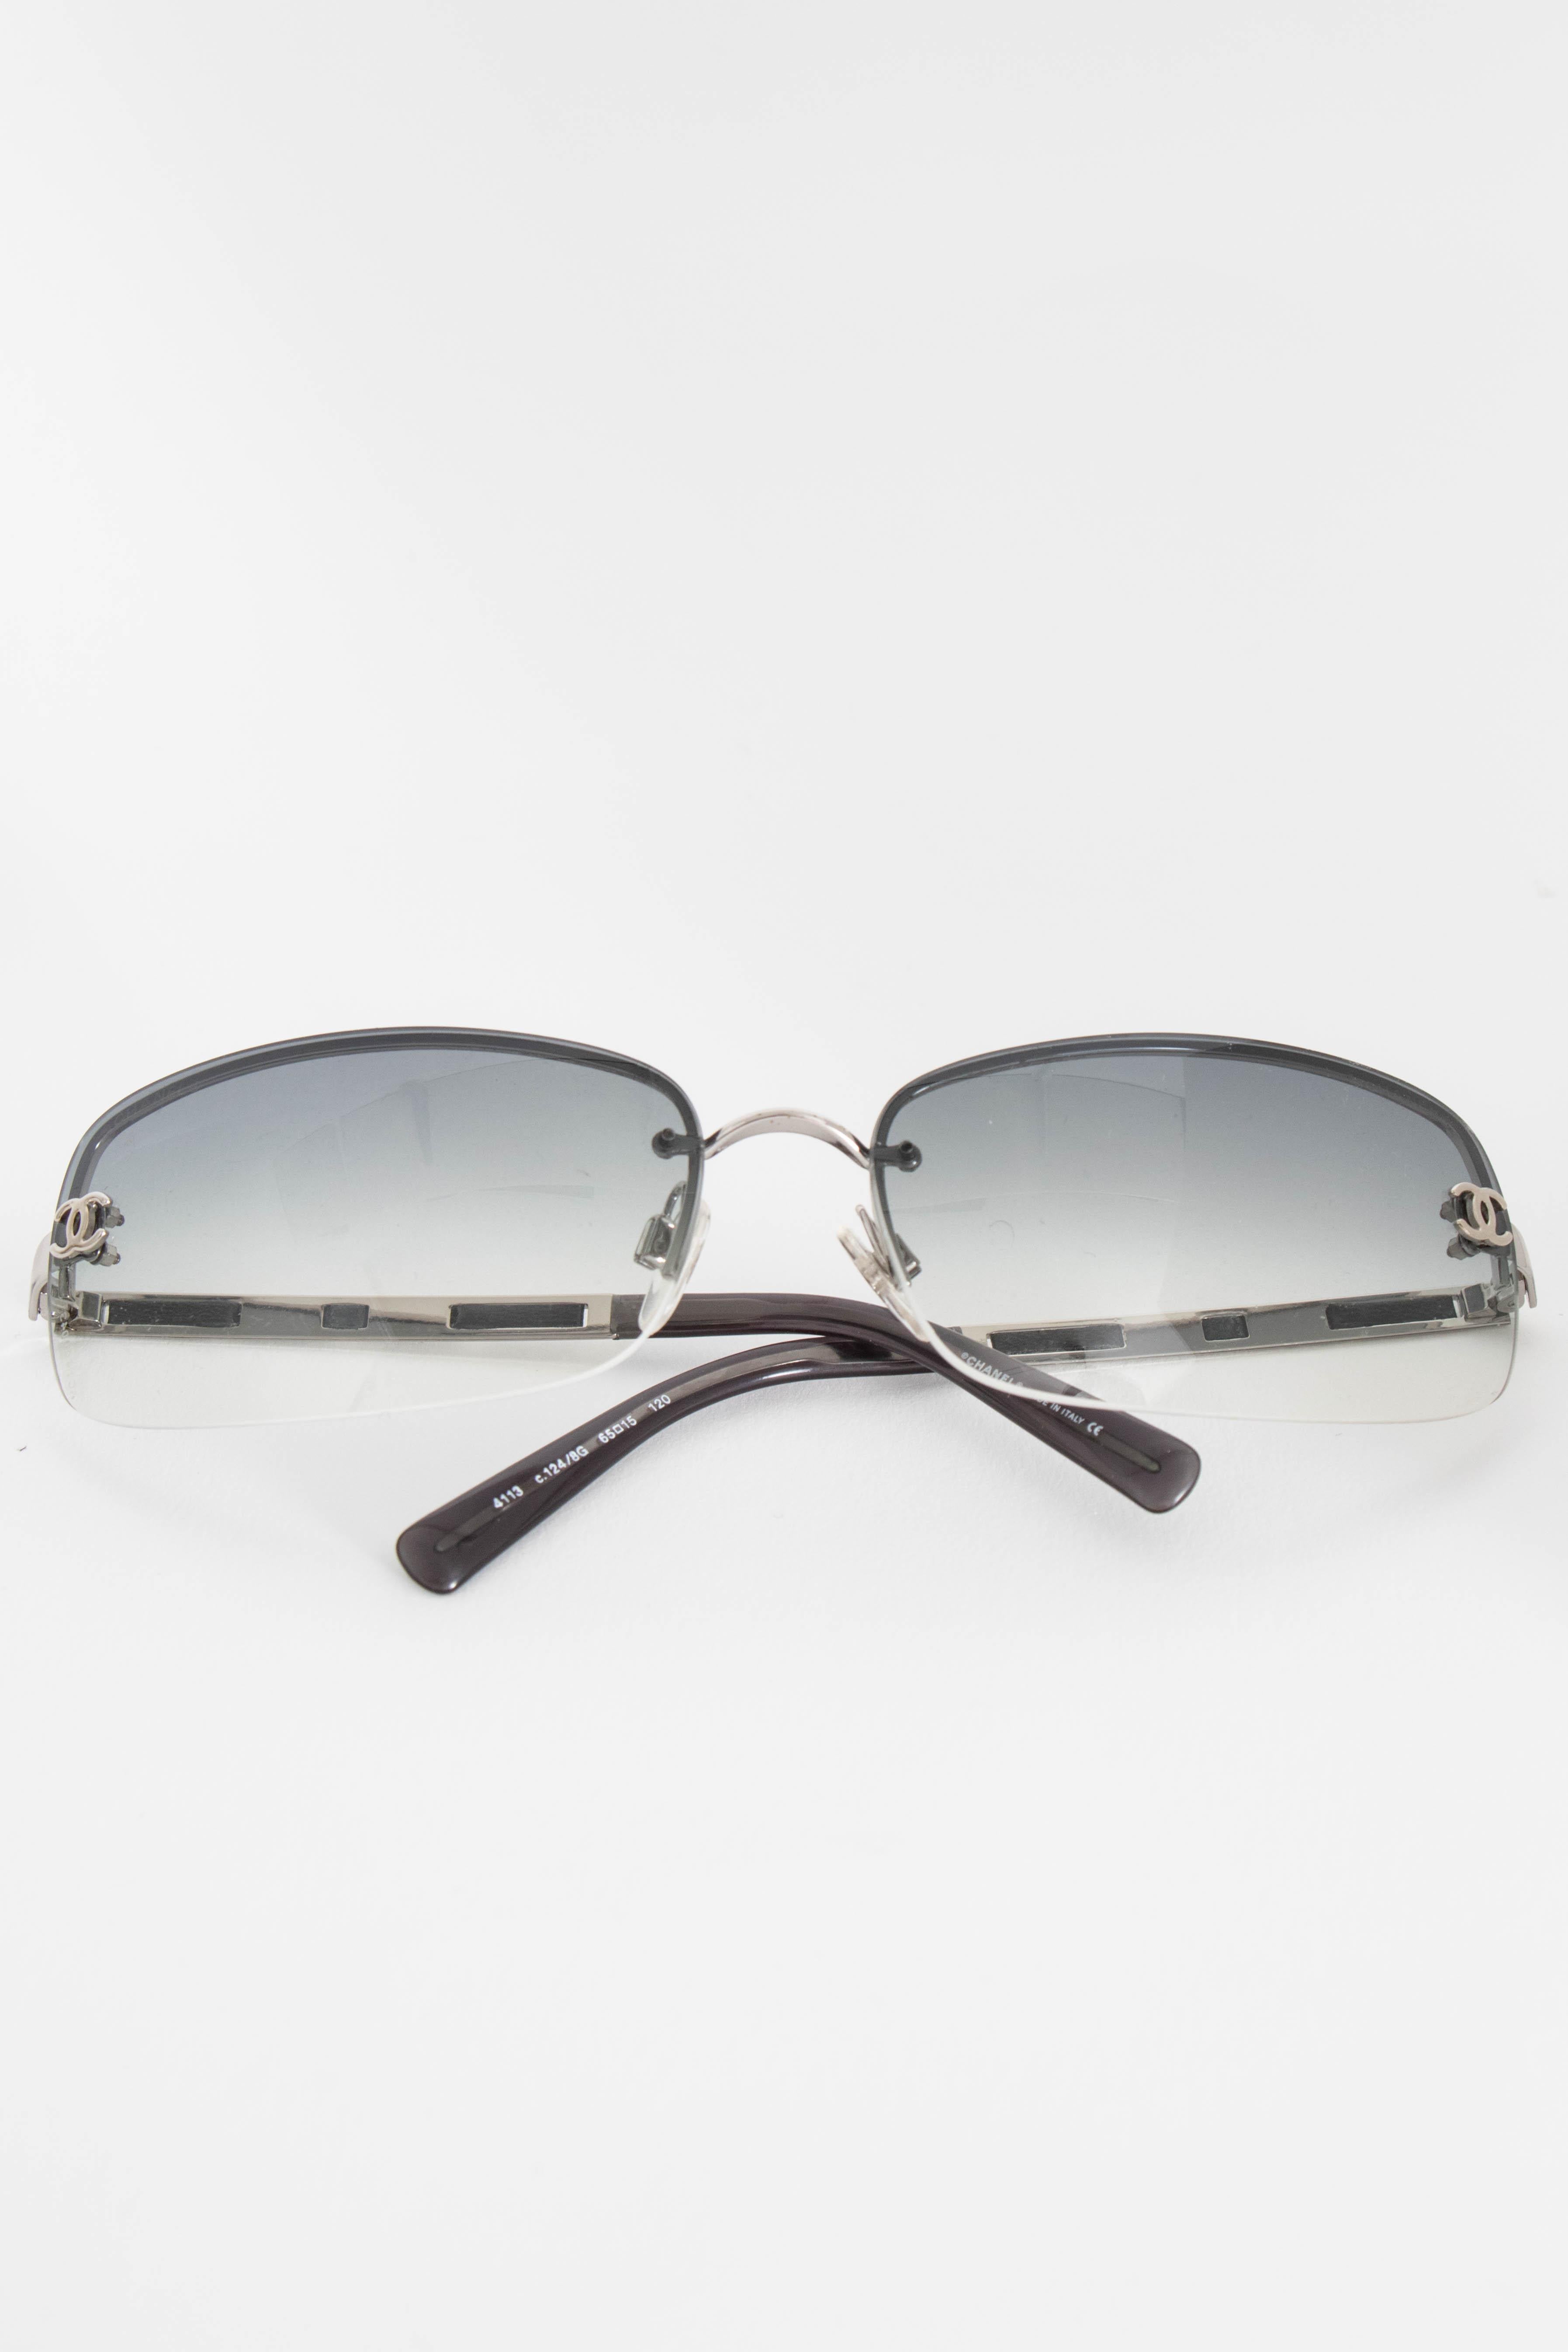 A pair of 1990s Chanel silver frame sunglasses with leather details along the temple and small Chanel double 'C' logos placed on both corners of the glasses. 

The sunglasses measure:
Temple length: 11.5 cm
Bridge: 1.5 cm
Eye width: 6.5 cm